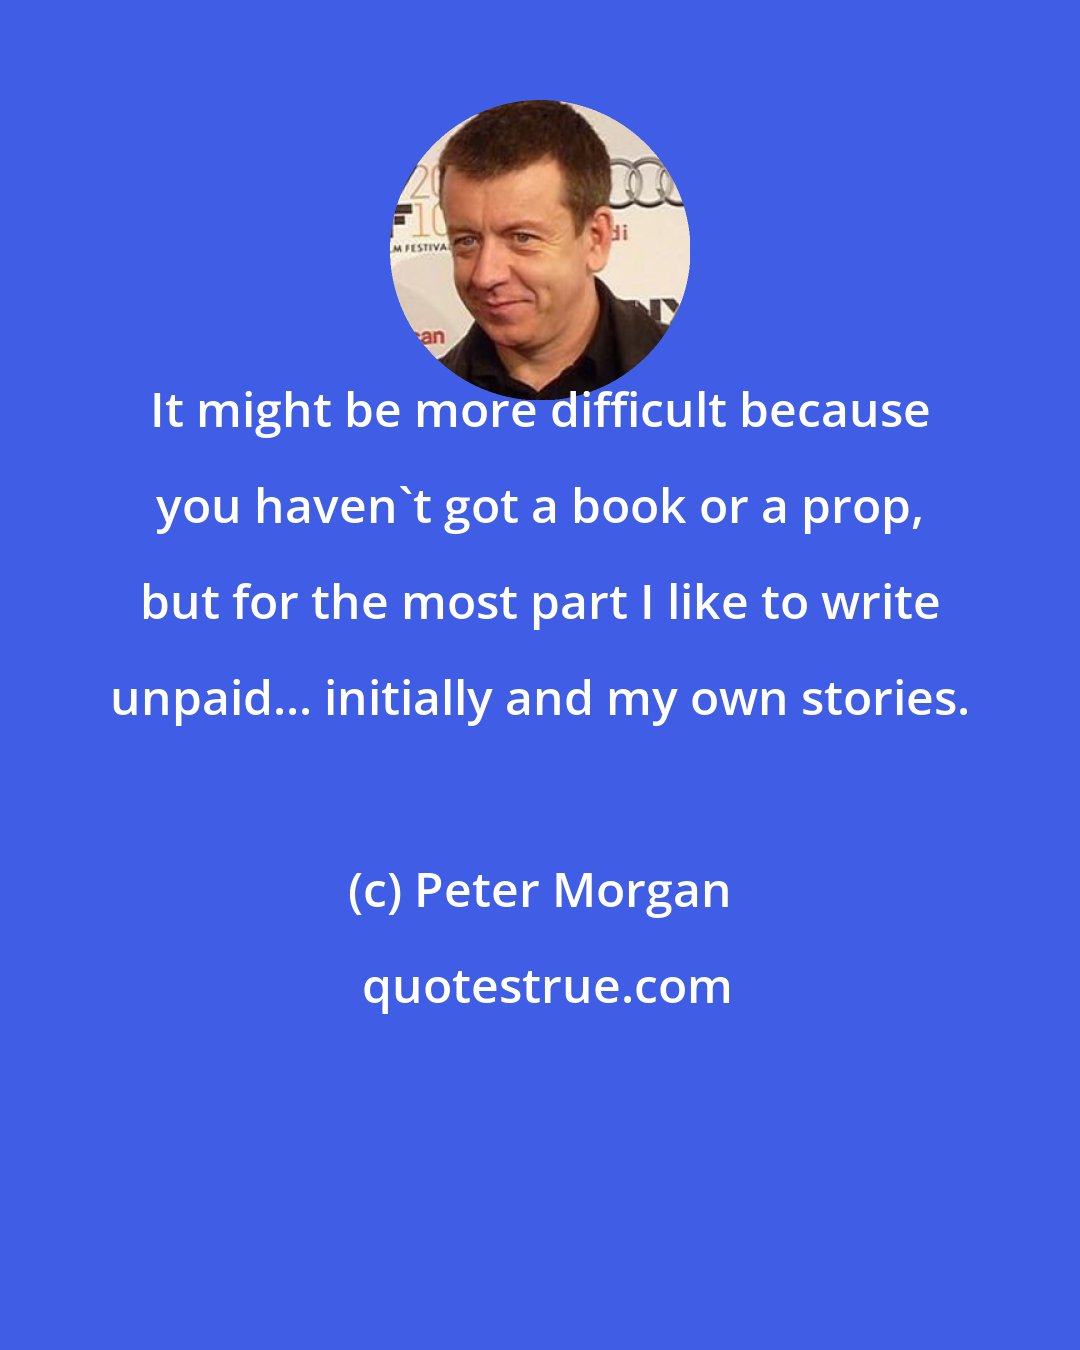 Peter Morgan: It might be more difficult because you haven't got a book or a prop, but for the most part I like to write unpaid... initially and my own stories.